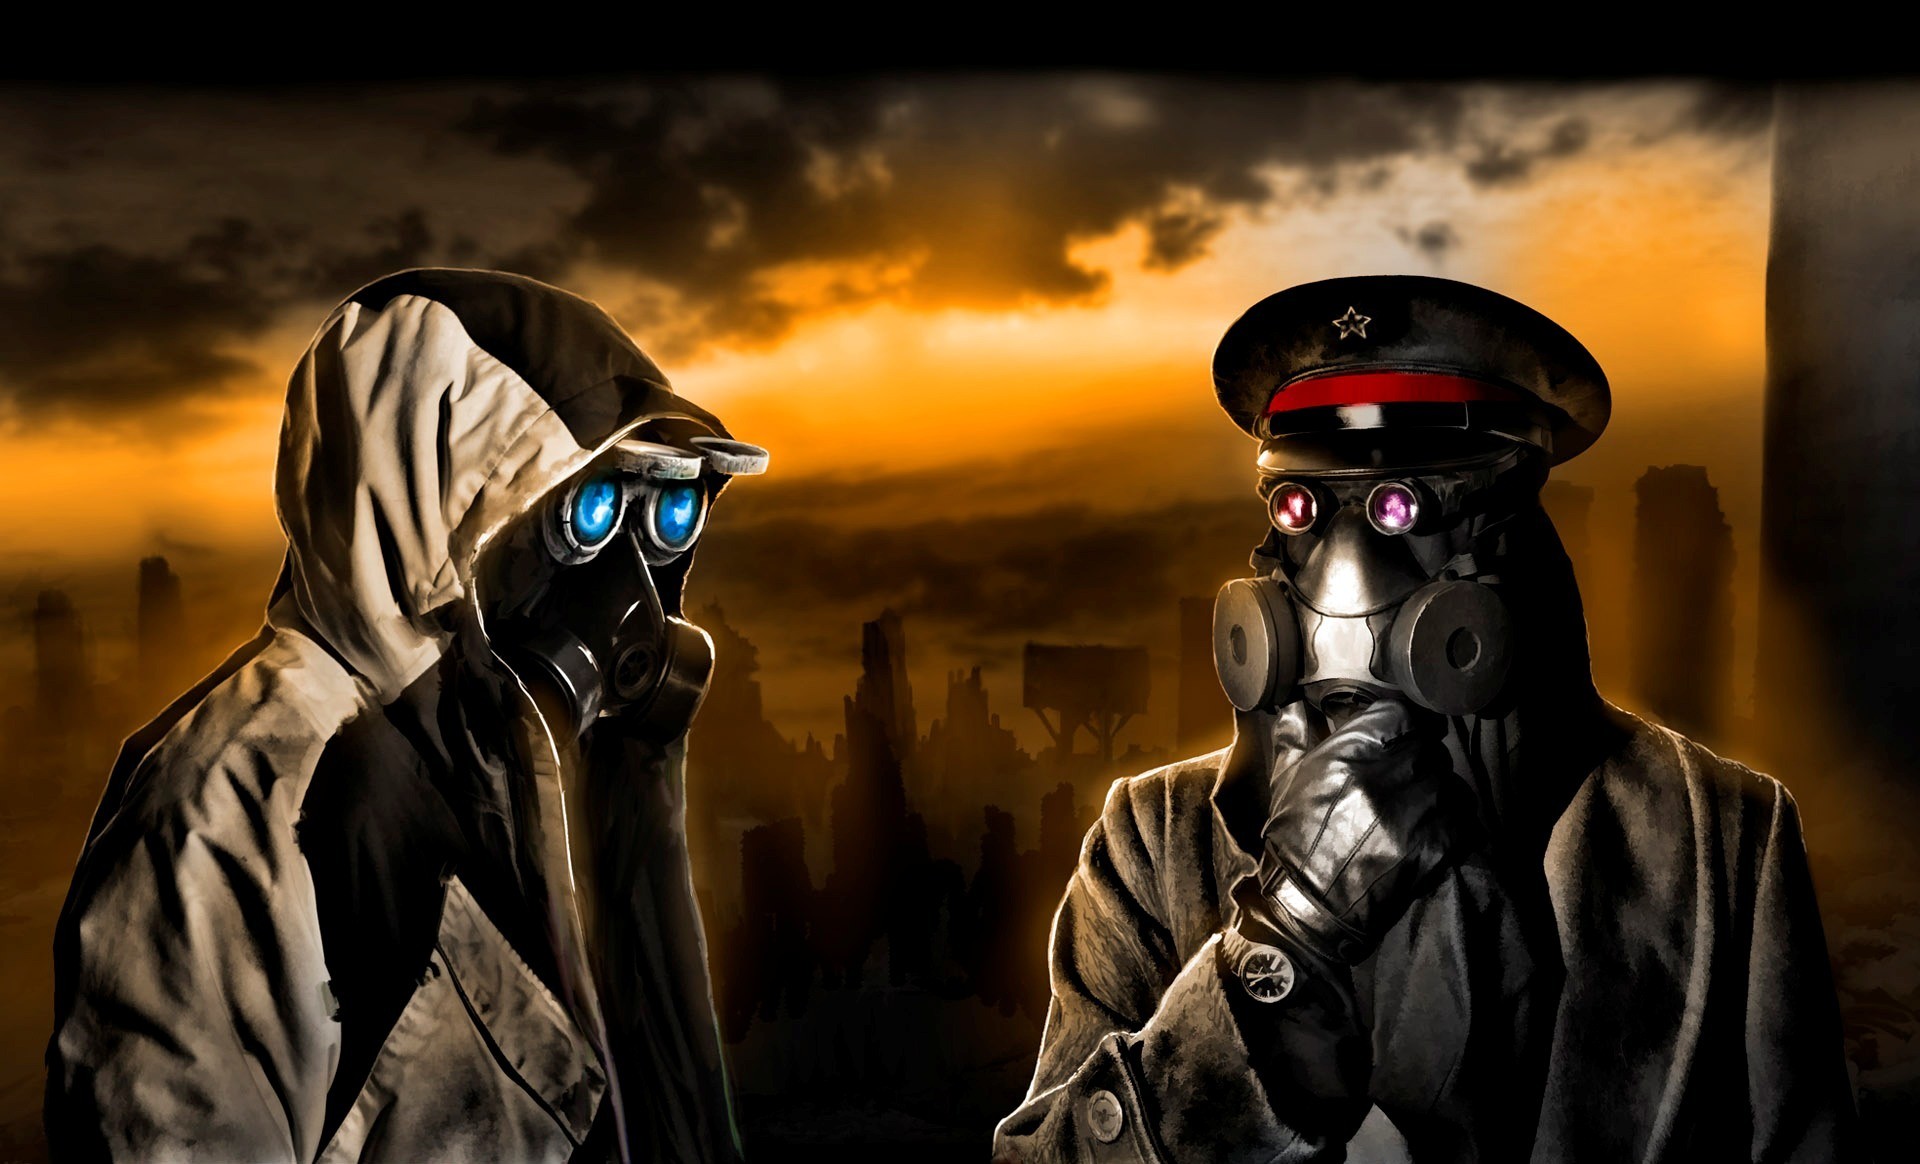 General 1920x1164 artwork apocalyptic men gas masks hat glasses clouds sunlight Romantically Apocalyptic Vitaly S Alexius Gone with the Blastwave